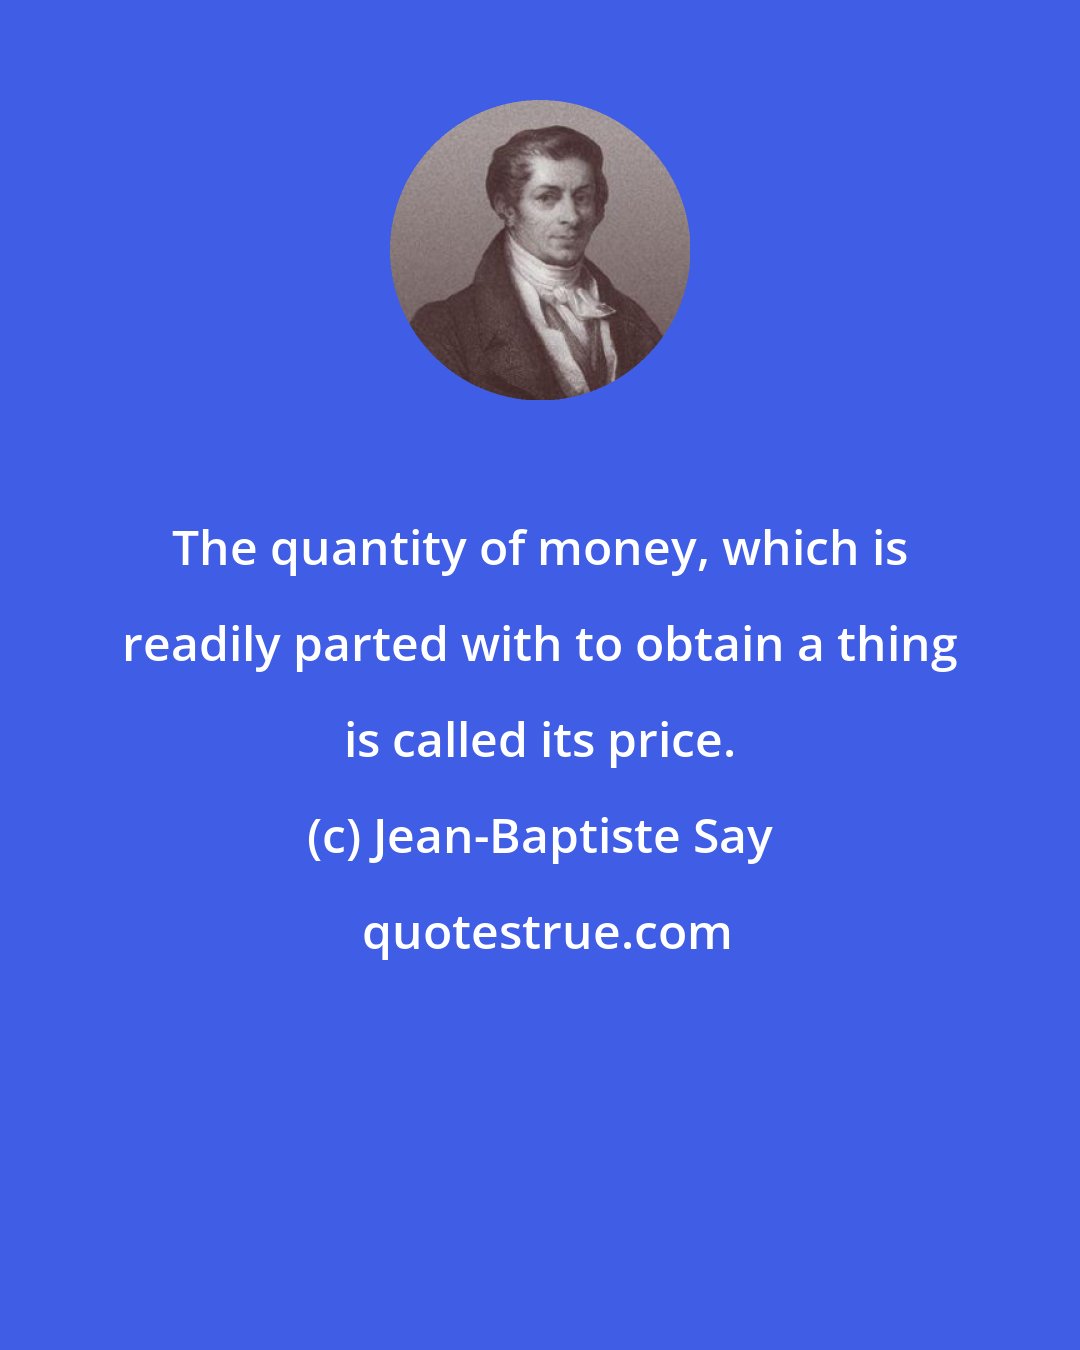 Jean-Baptiste Say: The quantity of money, which is readily parted with to obtain a thing is called its price.